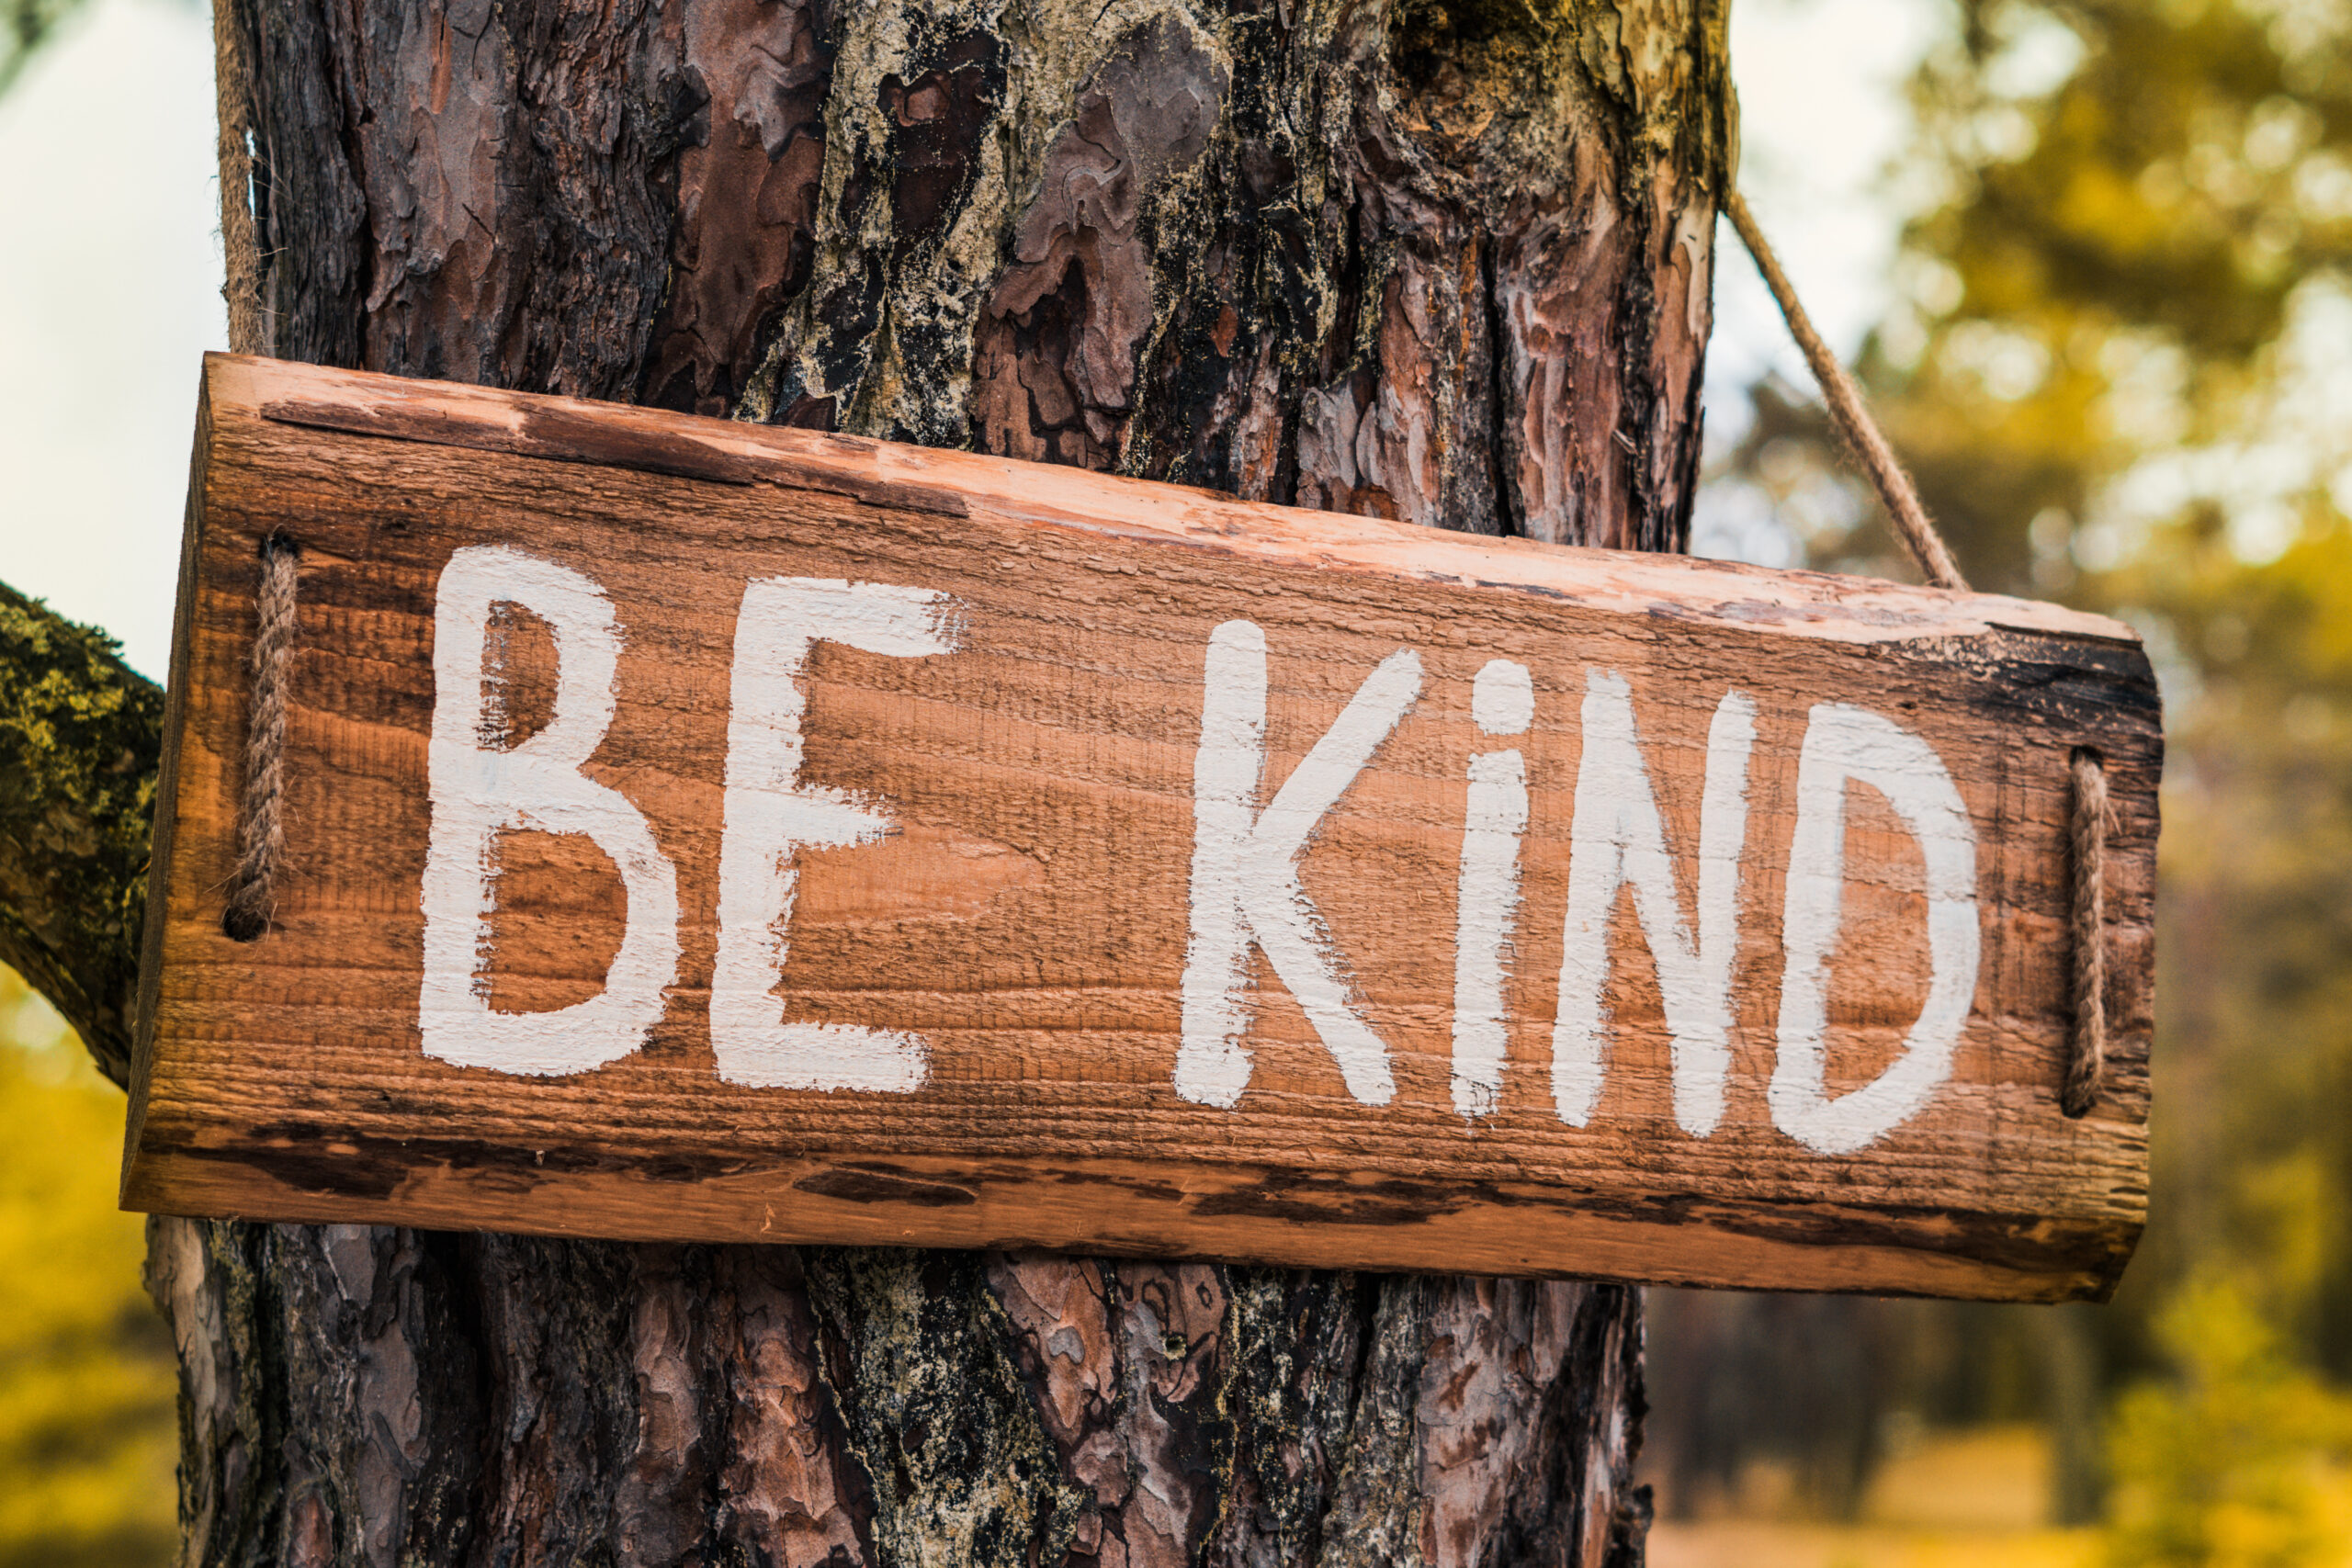 Wooden motivating sign on an old pine tree in the autumn park says "Be kind." Can be used as an illustration or marketing concept. Unity with nature